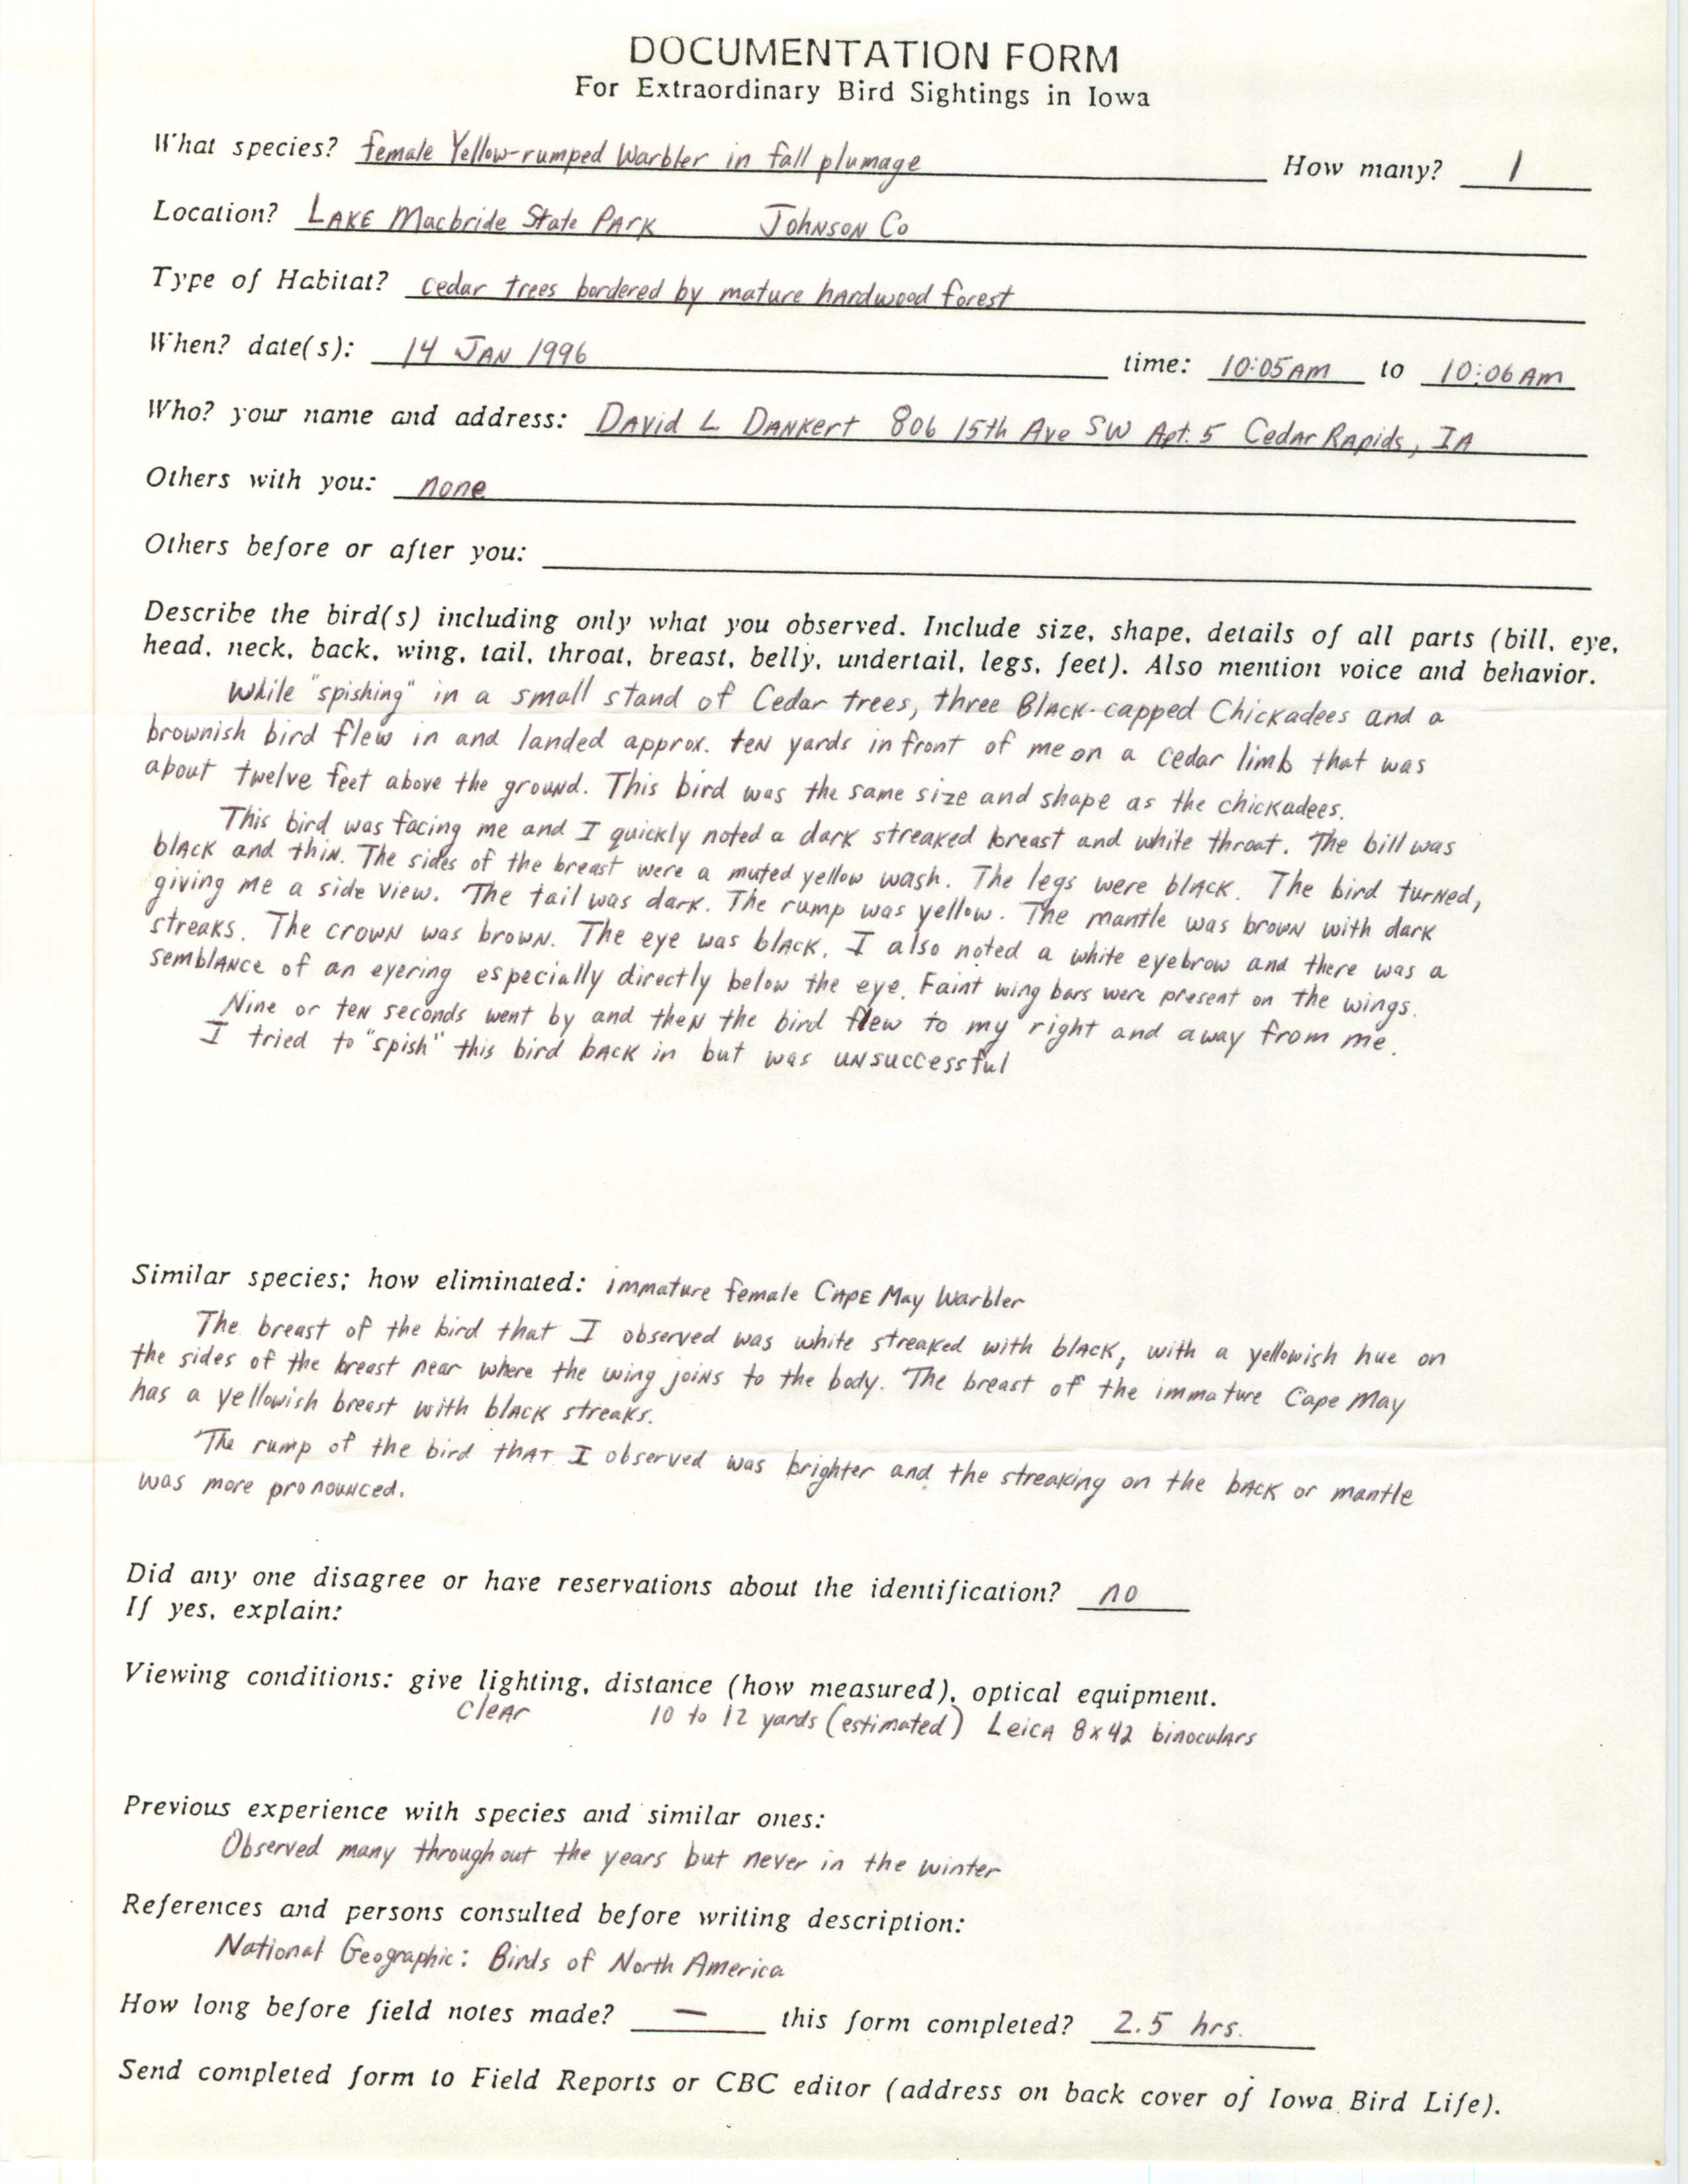 Rare bird documentation form for Yellow-rumped Warbler at Lake MacBride State Park, 1996